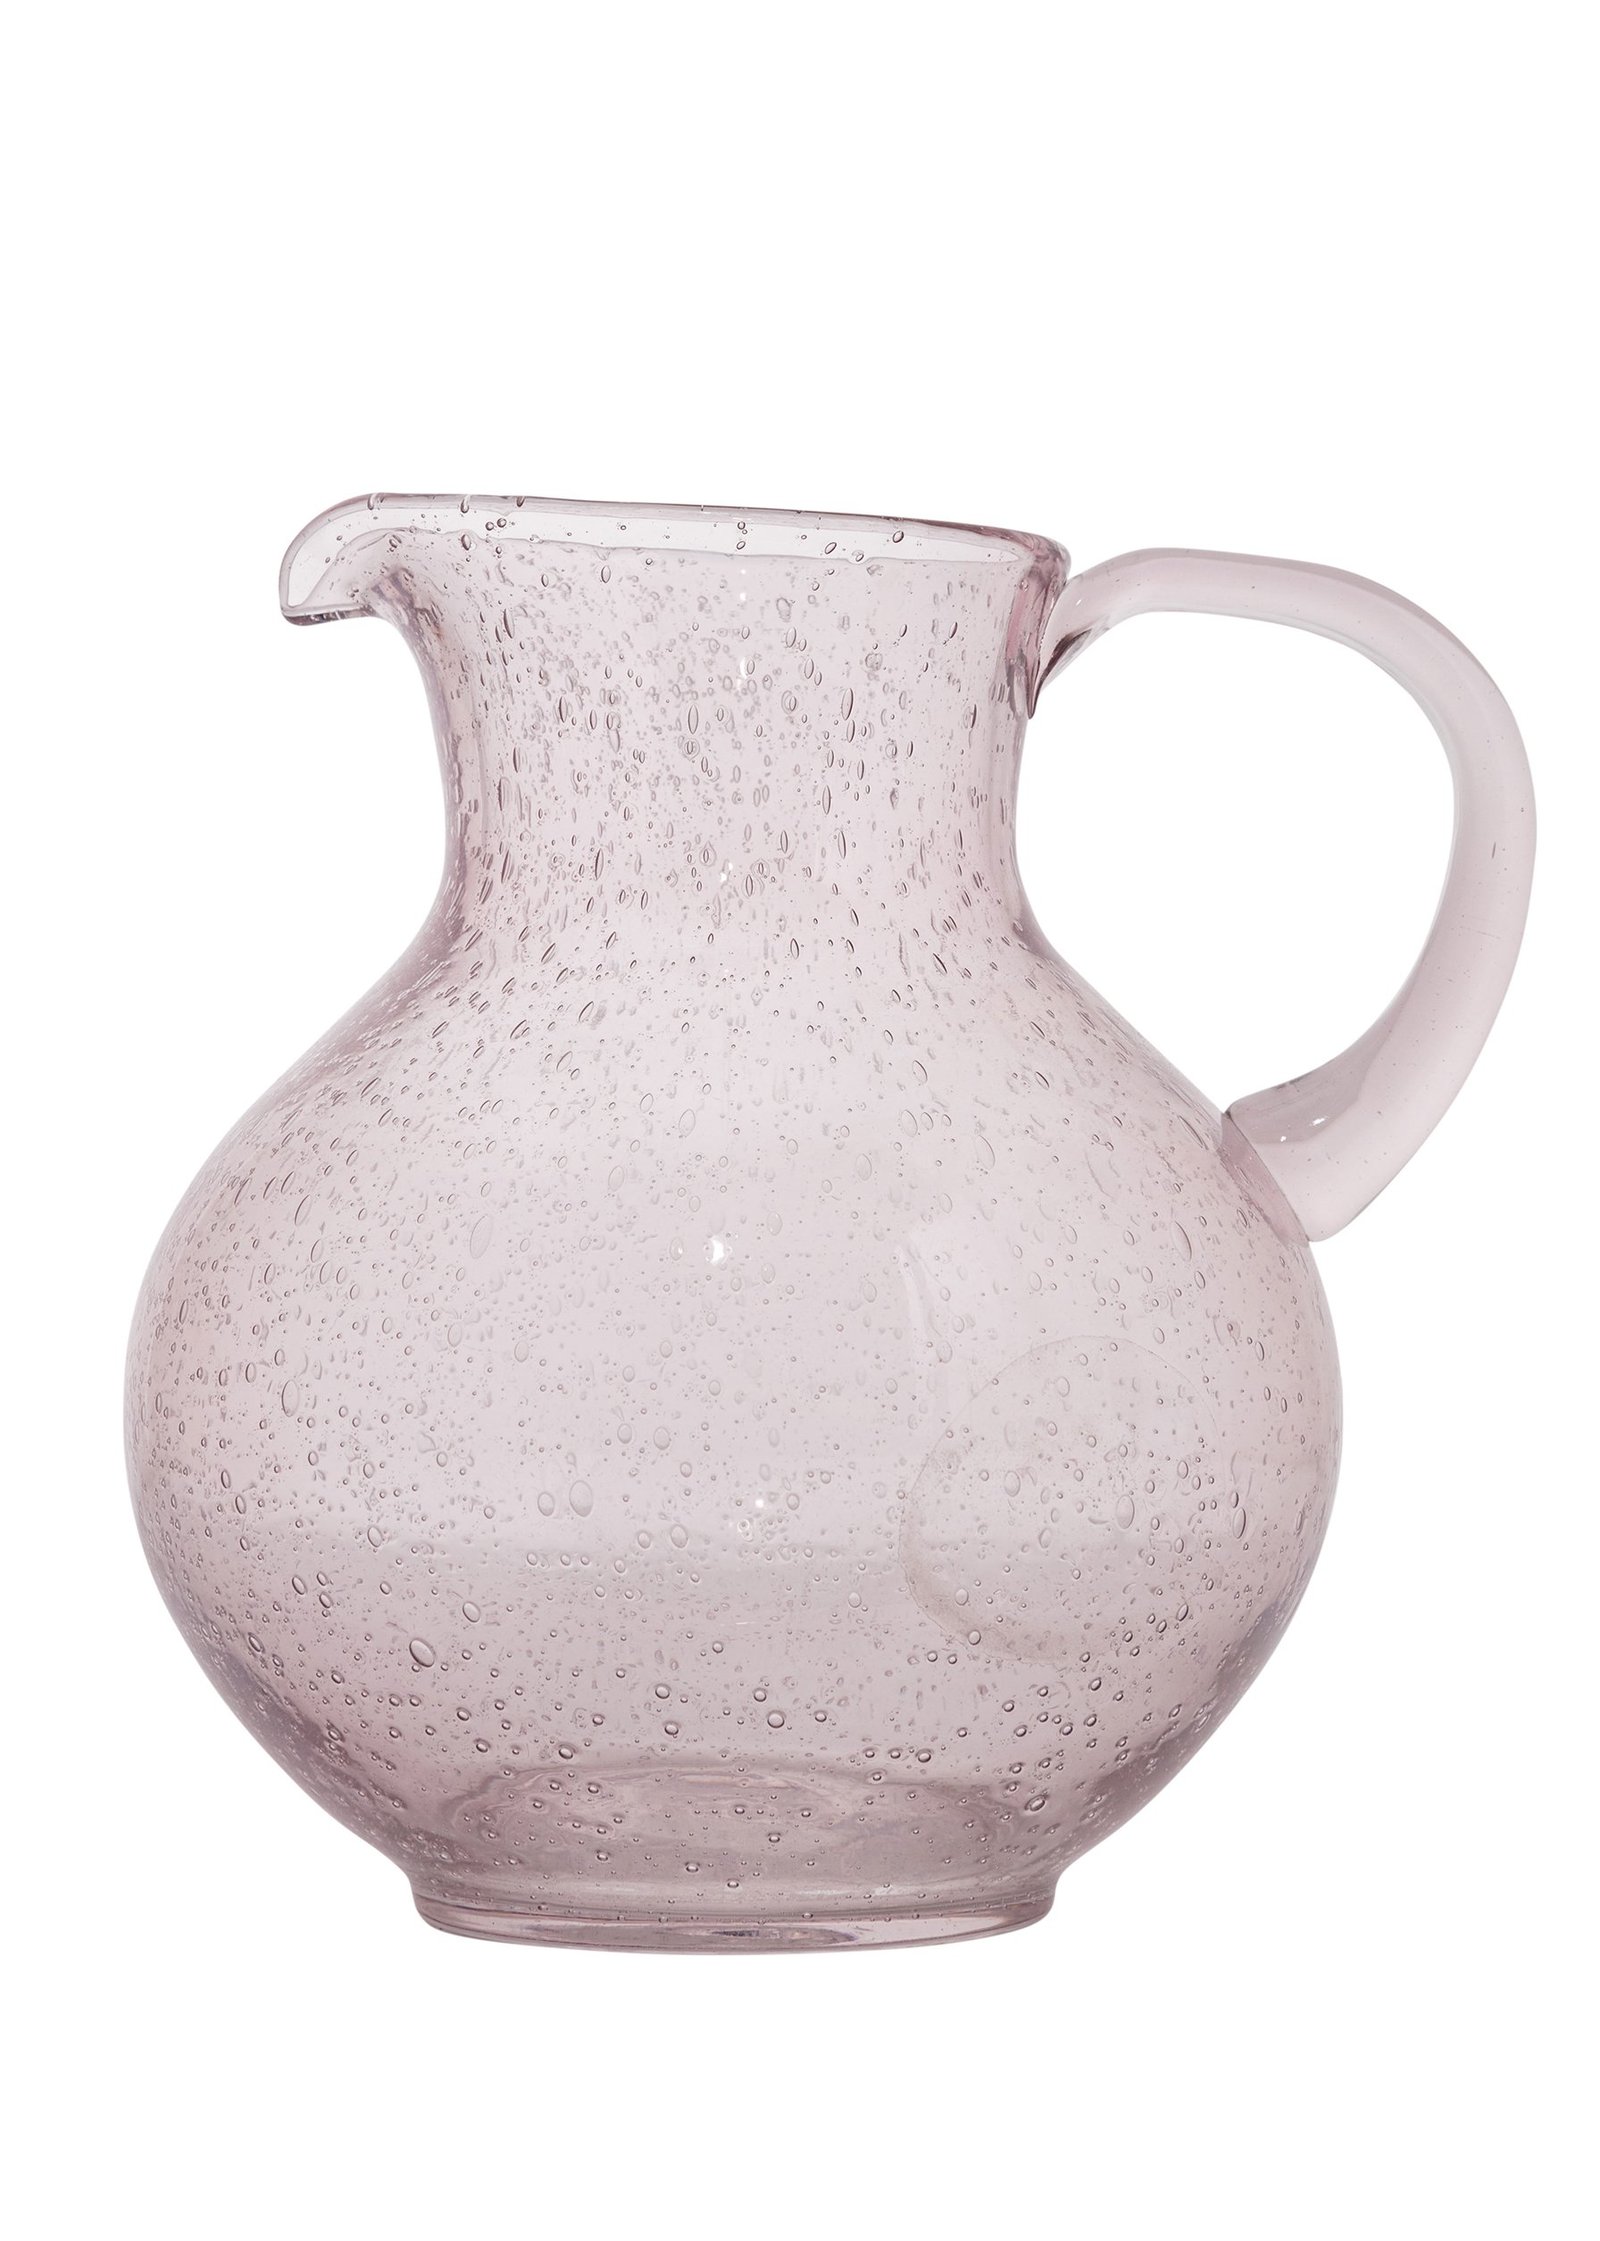 Glass carafe with bubbles Image 0